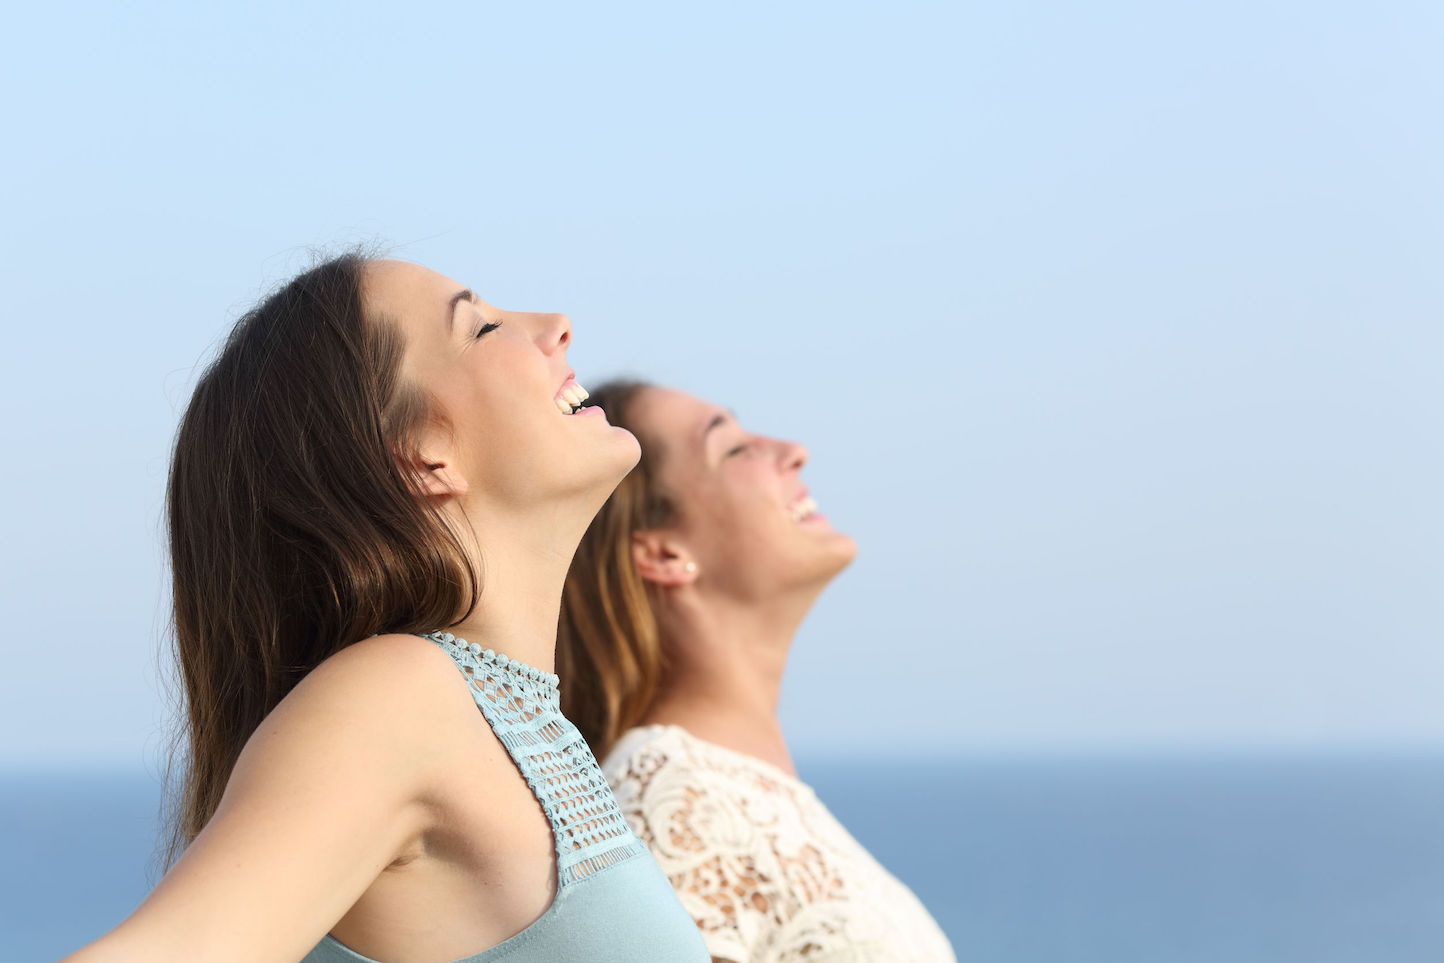 Two girls doing breath exercises inhaling fresh air on the beach